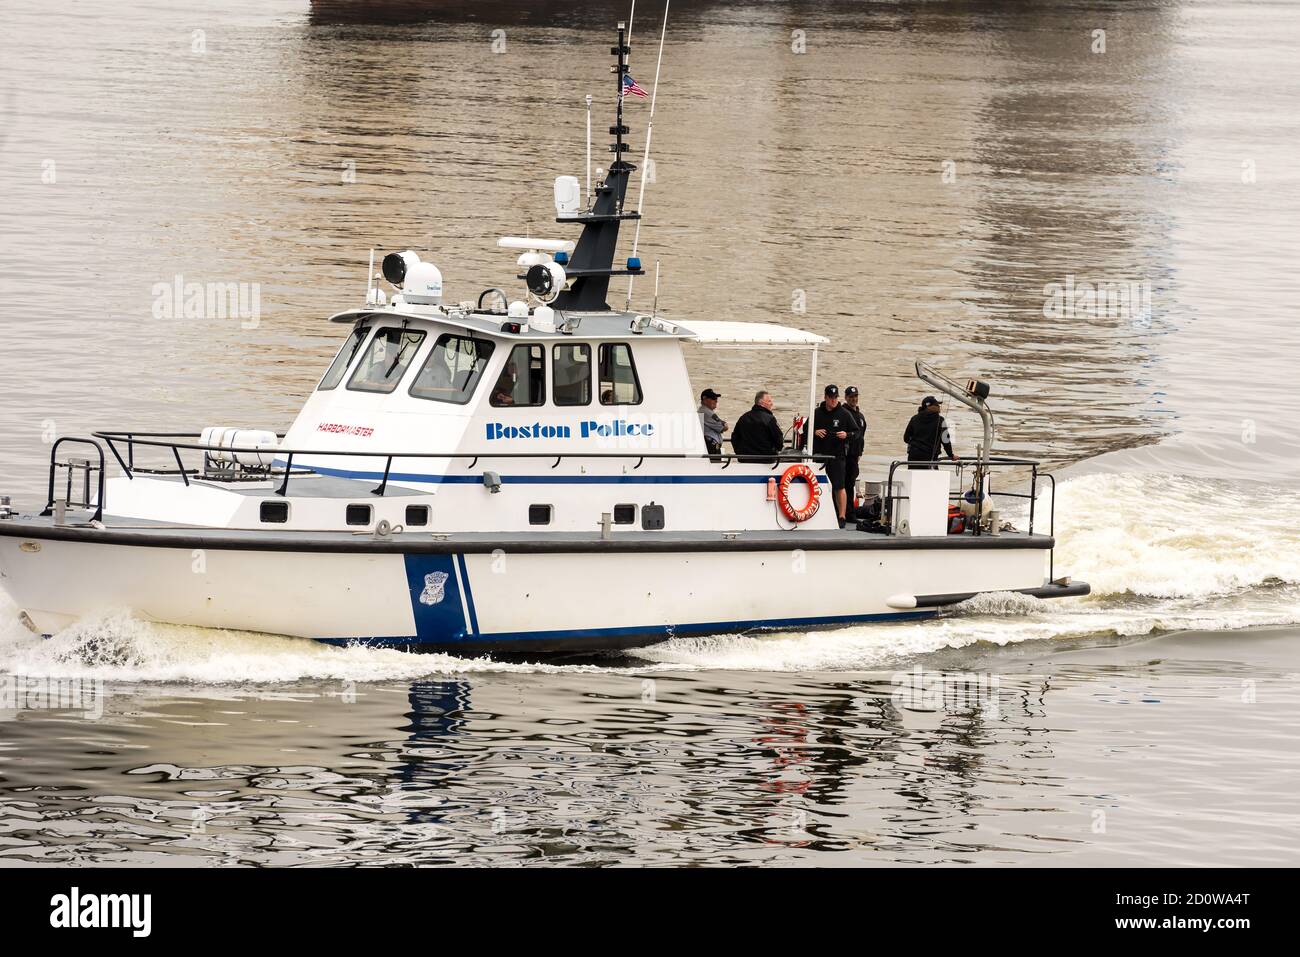 Boston, Massachusetts. 13th June, 2017. Boston Police Harbor Master during Parade of Sail at Sail Boston. Photographed from the USS Whidbey Island. Stock Photo